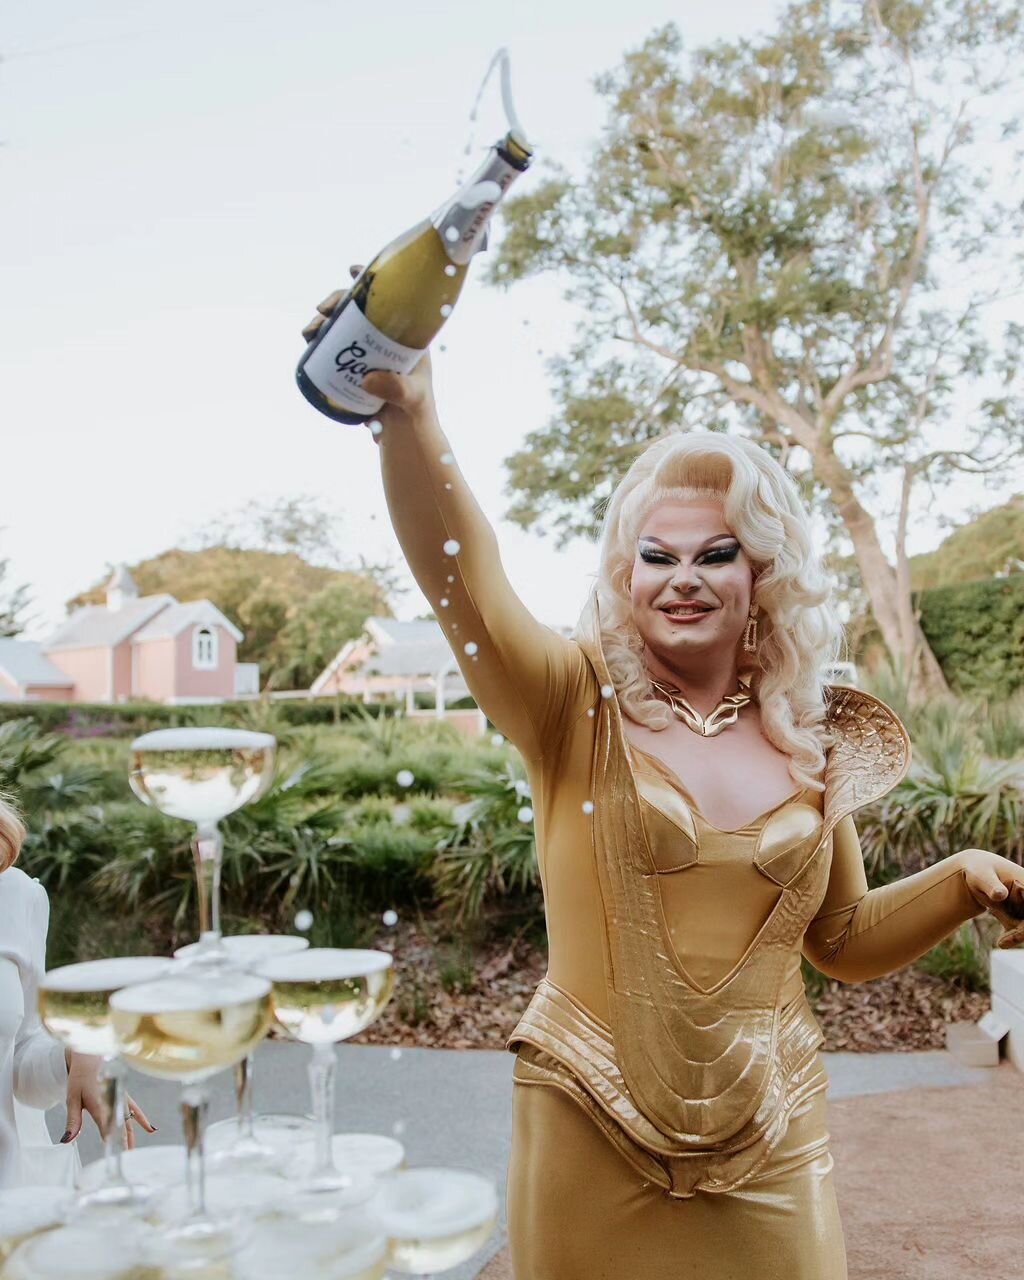 Champagne towers and drag queens!
That's my kind of party!!!!!

This was the coolest wedding celebration I have ever witnessed! What a blast!!

#weddingphotographers #wedding #updatingmyinstagramposts #Shannonsmilesphotography #Illawarraphotographers